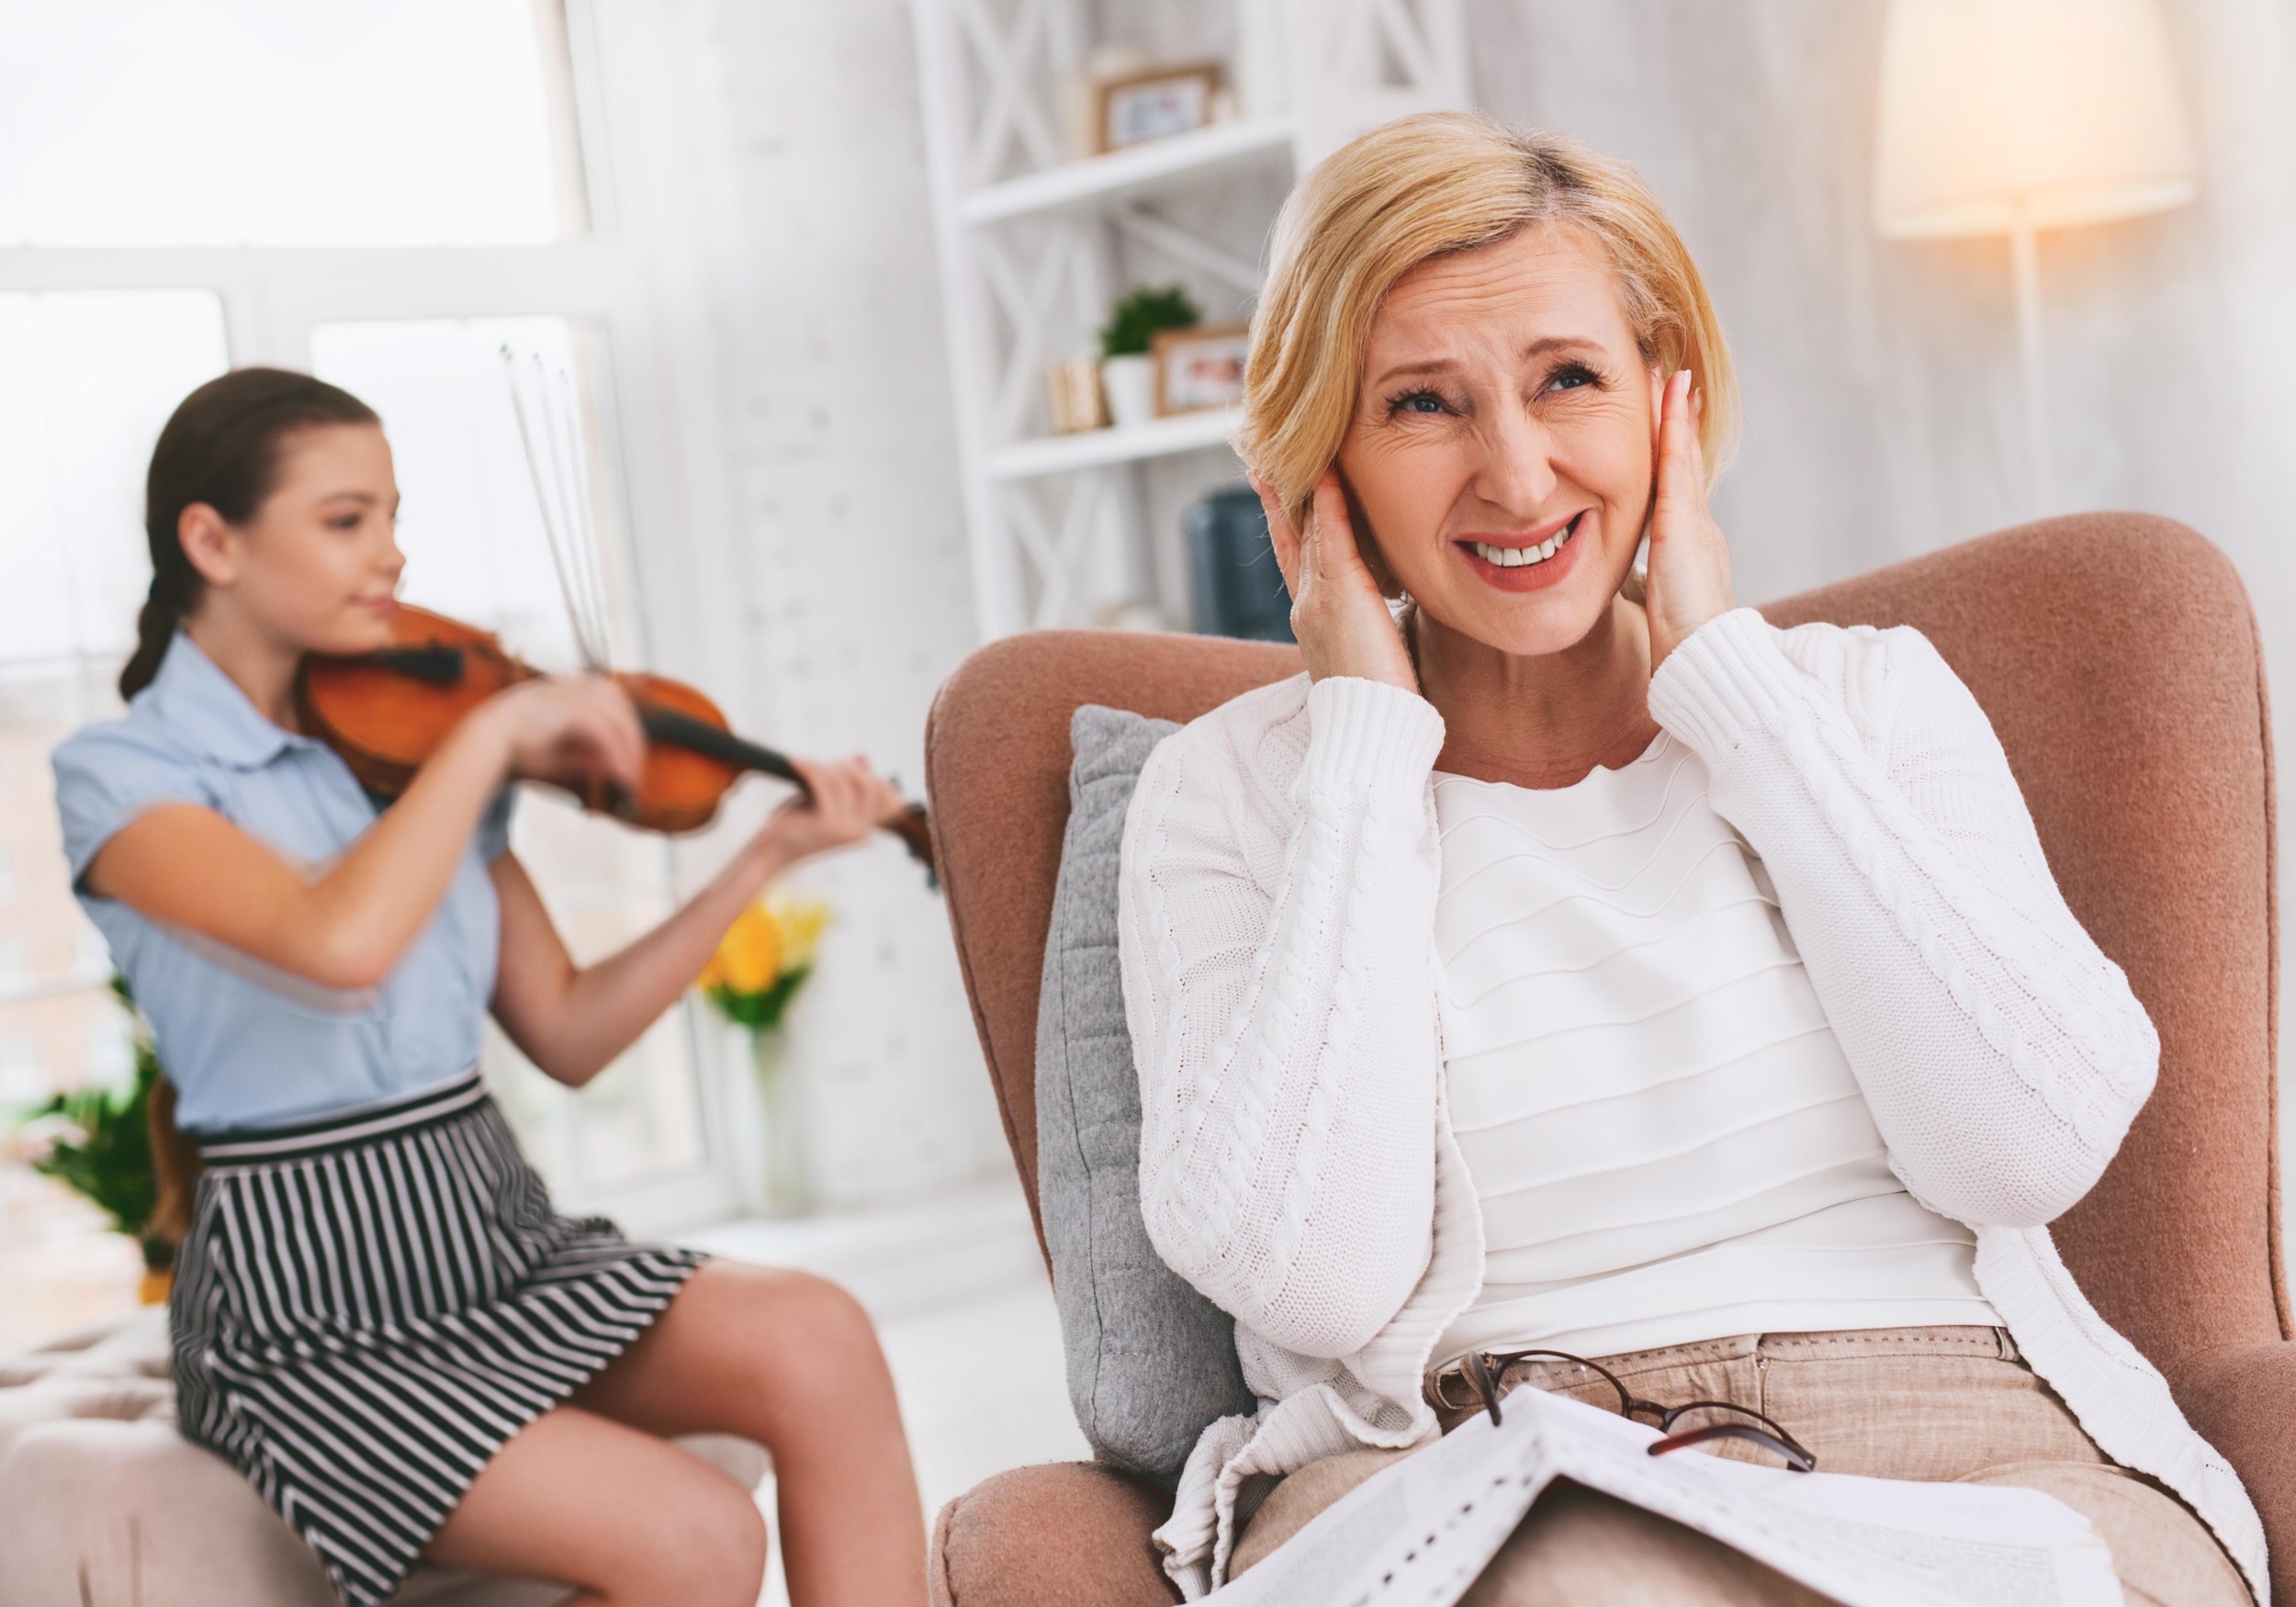 Woman with a grimace/smile and her hands over her ears while a young girl behind her plays violin